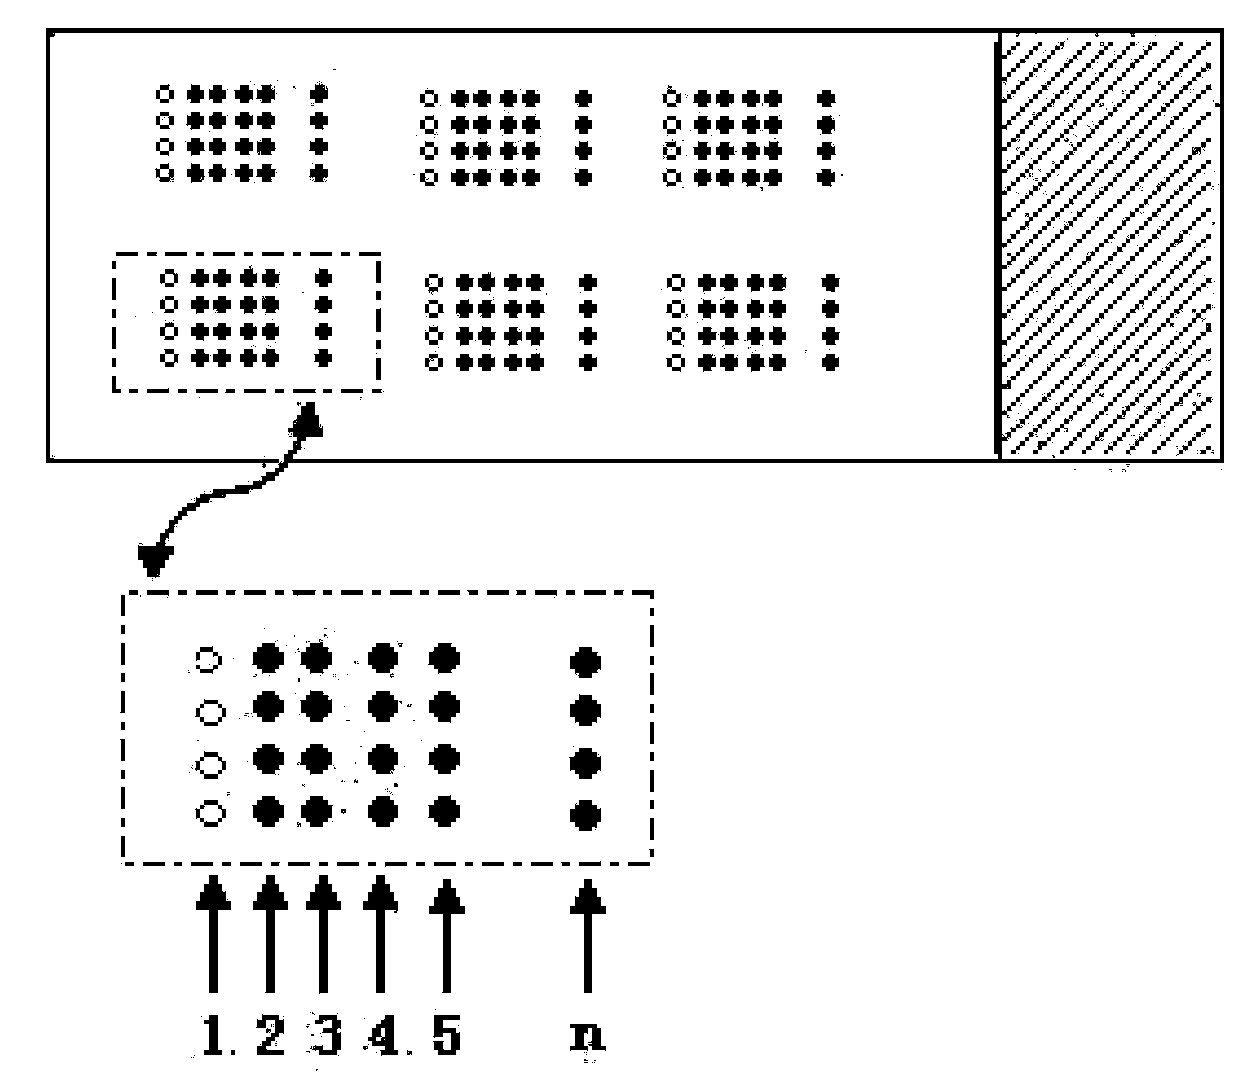 Pesticide and veterinary drug multi-residue detection method based on microarray detection chip